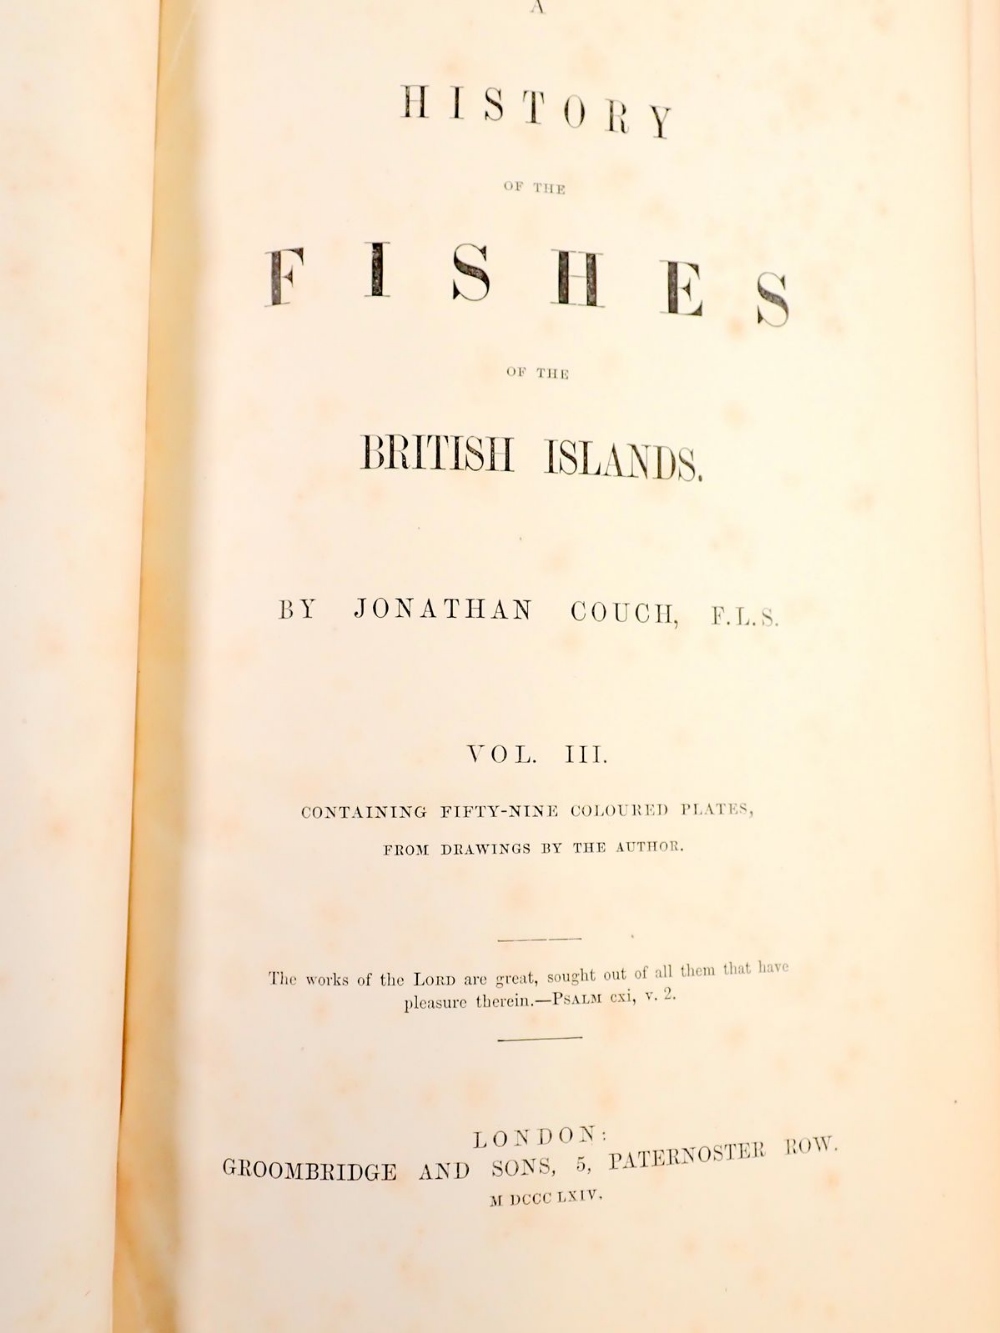 A History of the Fishes of the British Islands, Vol 3 published 1864 - Image 2 of 3